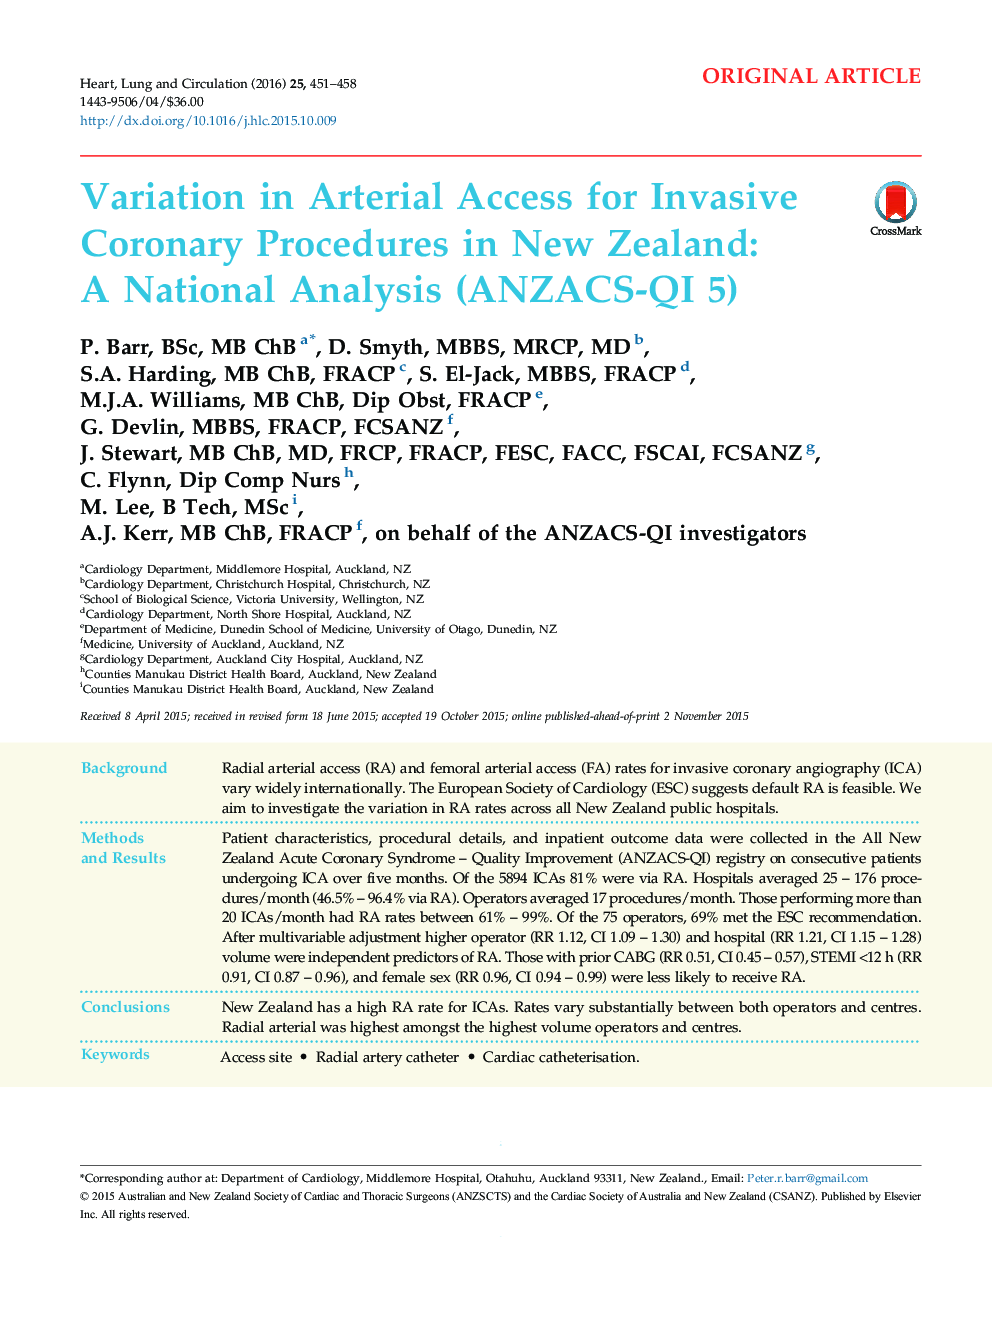 Variation in Arterial Access for Invasive Coronary Procedures in New Zealand: A National Analysis (ANZACS-QI 5)